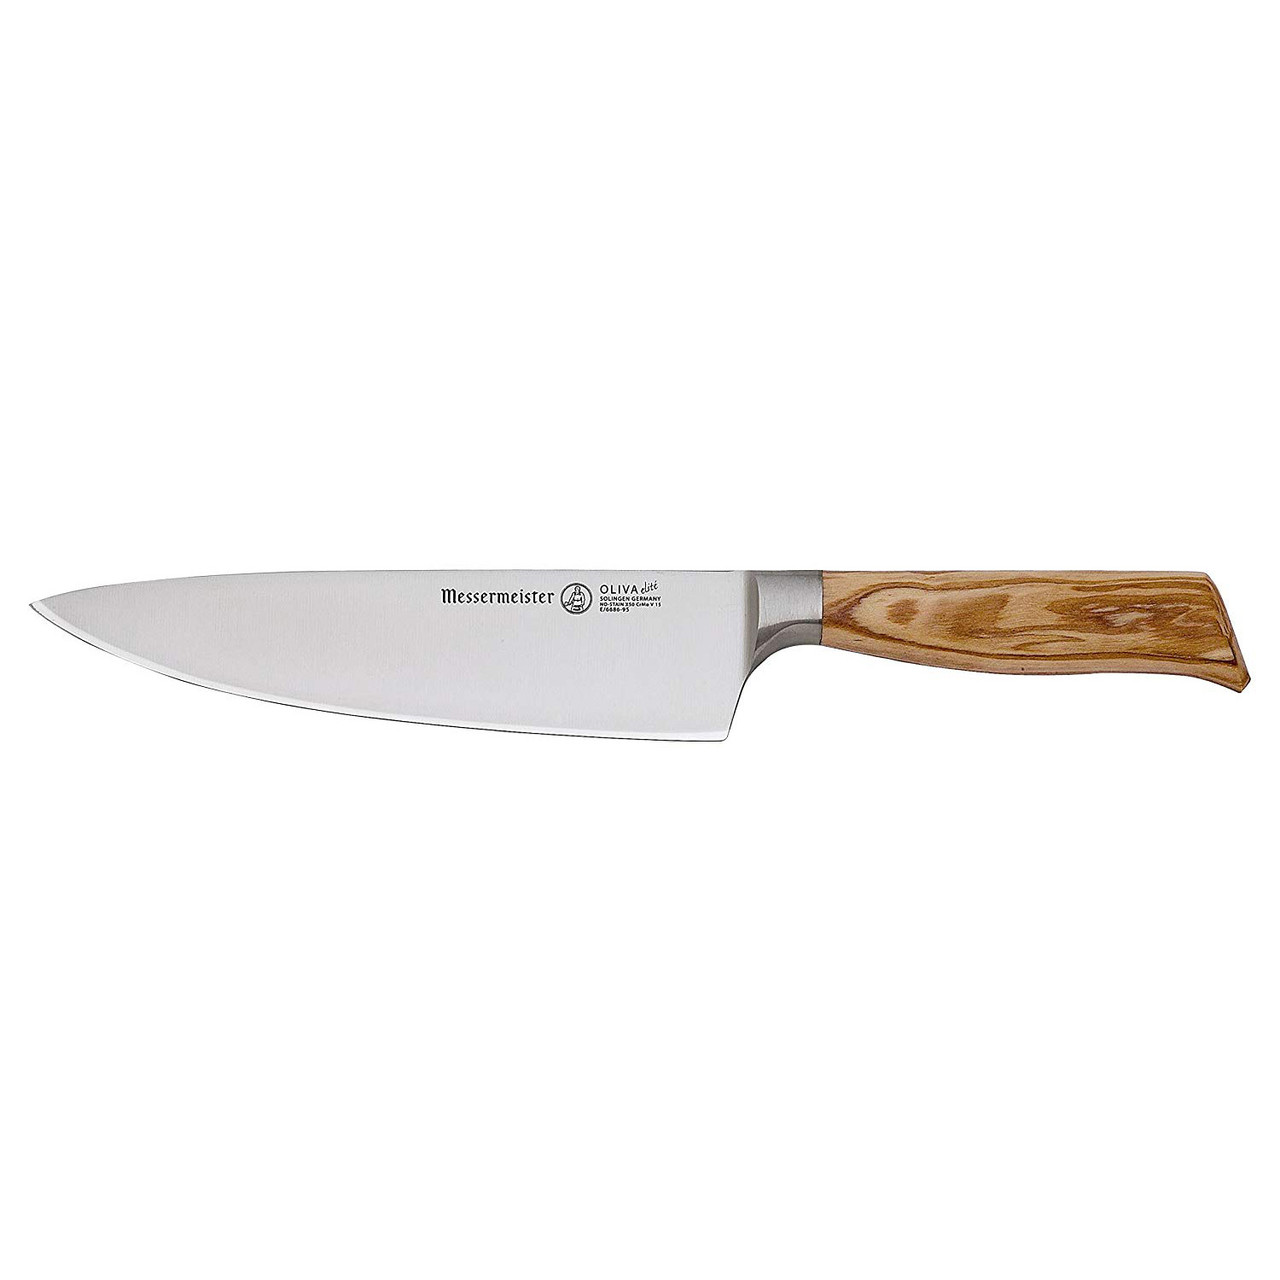 Messermeister Oliva Elite Stealth 8 Chef's Knife – The World of Cutlery